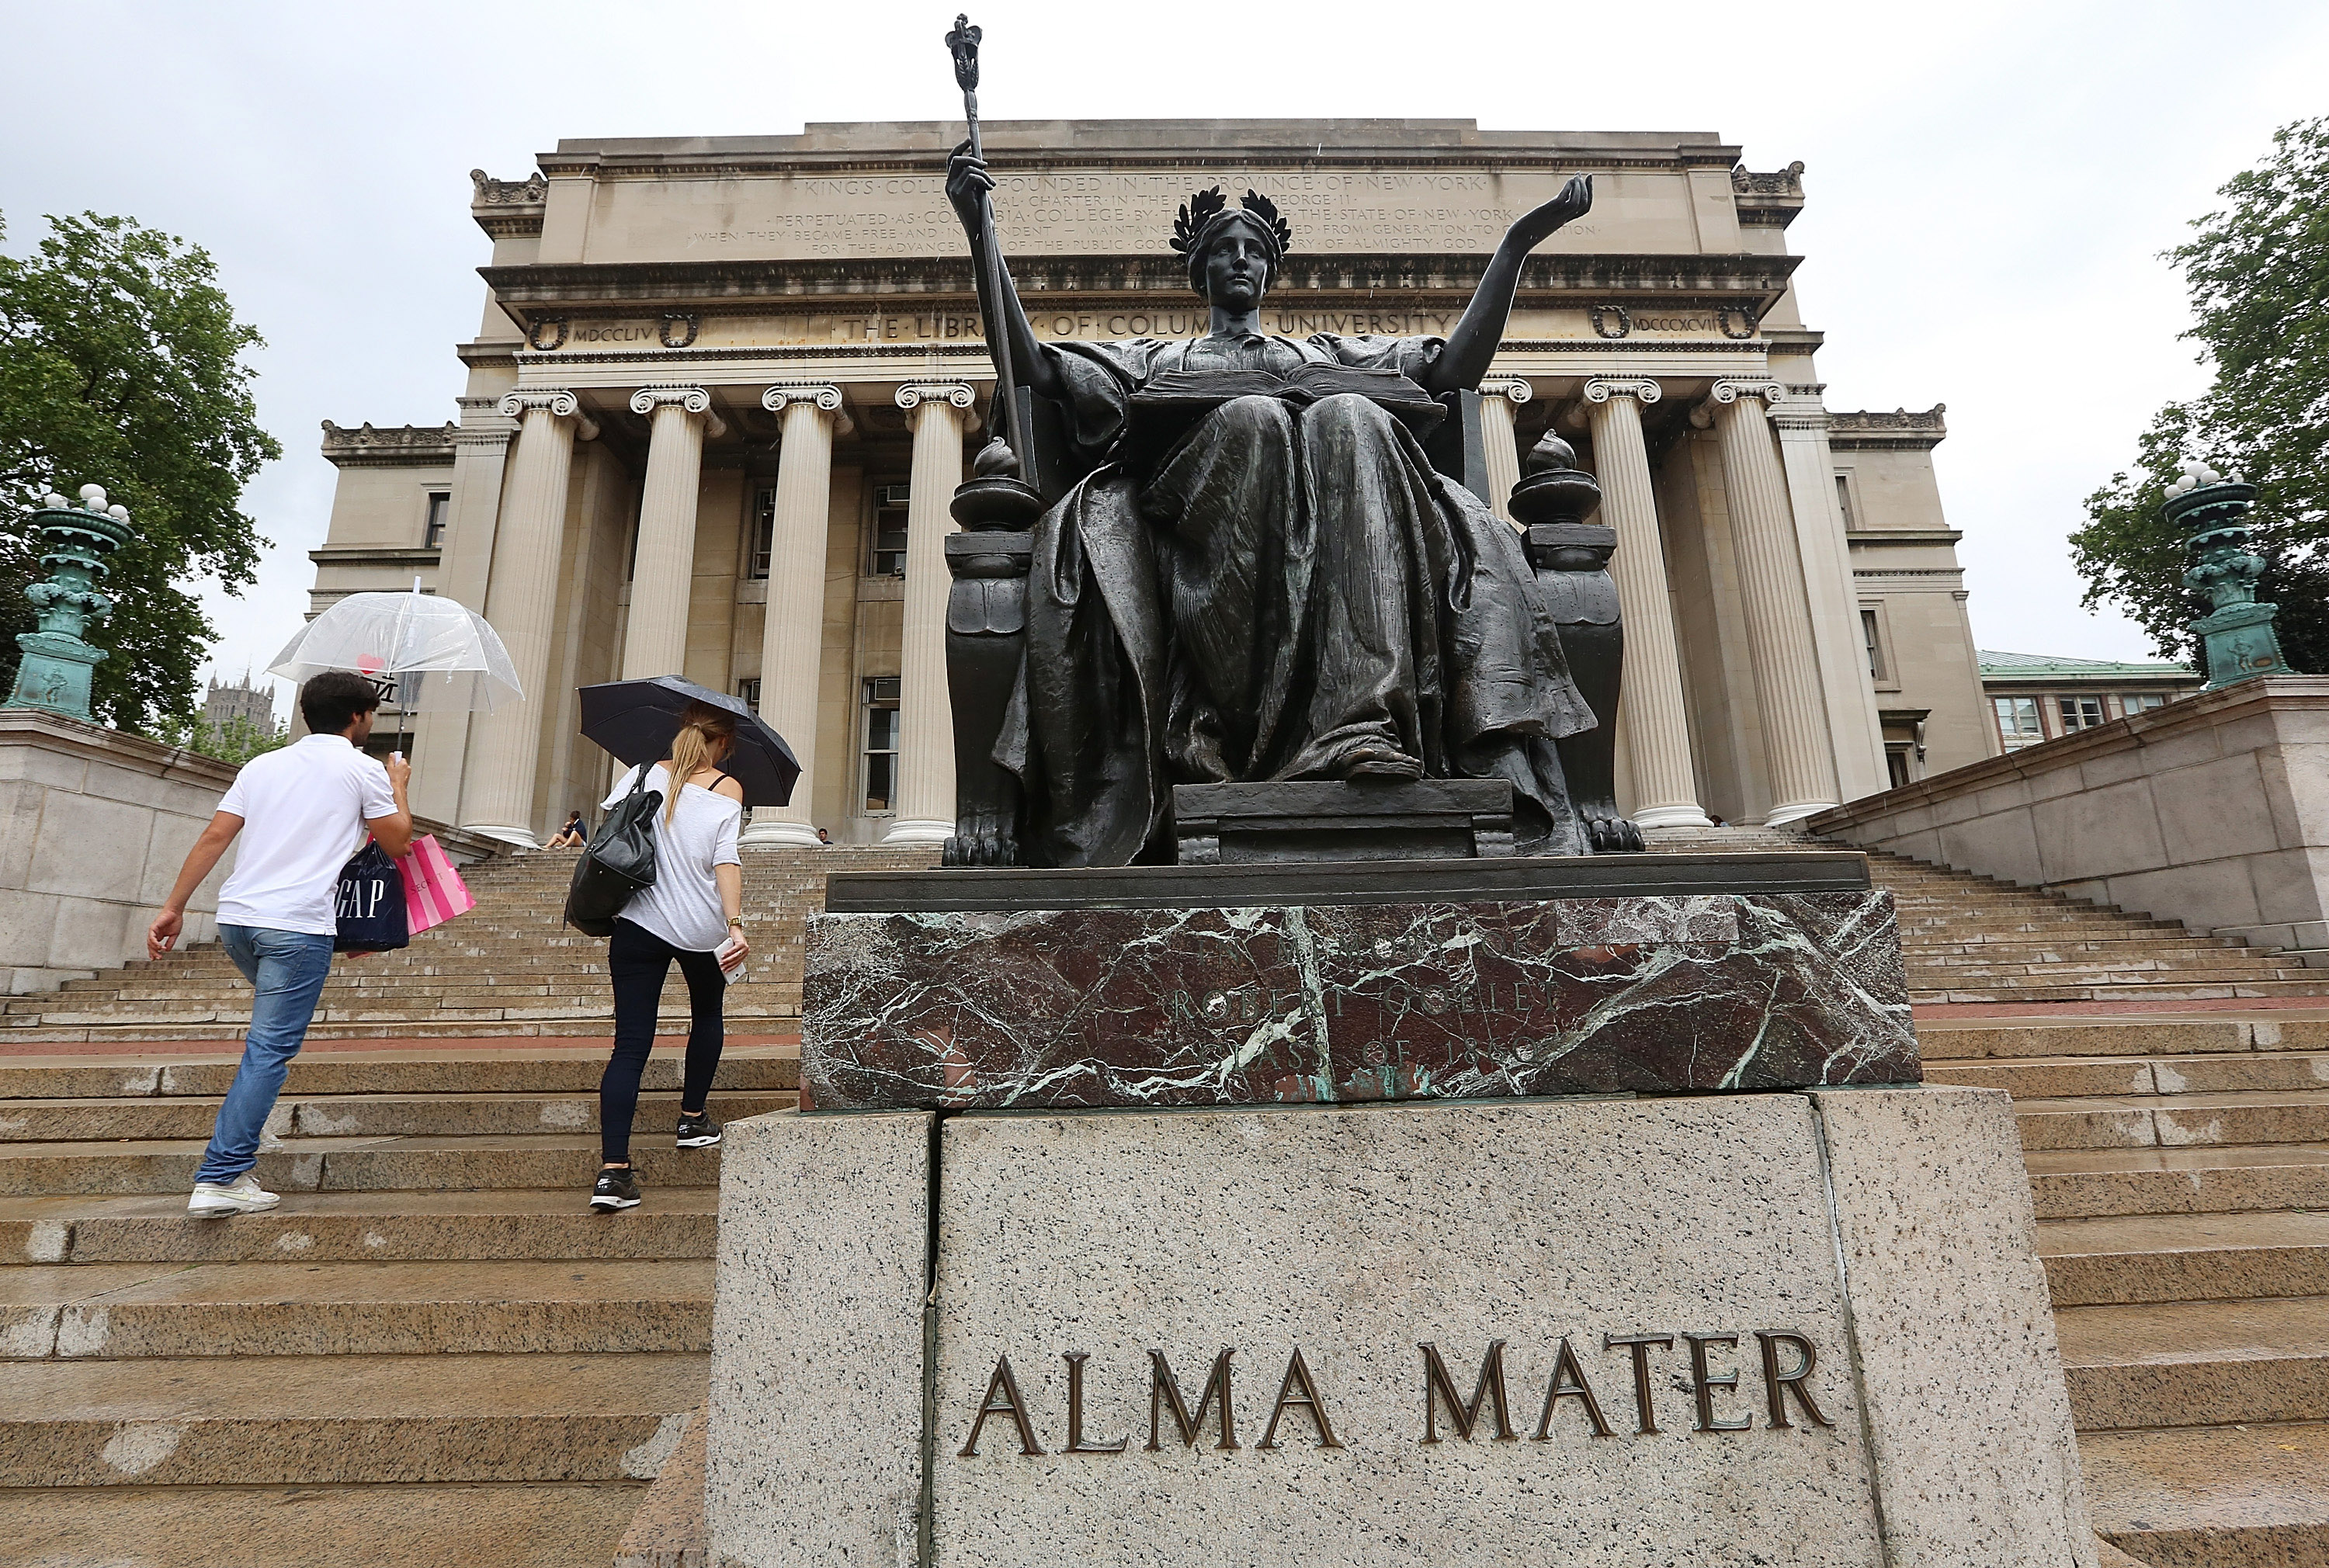 People walk past the Alma Mater statue on the Columbia University campus on July 1, 2013 in New York City. An interest rate hike kicks in today for student loans, an increase for 7 million students. Congress left town at the end of last week failing to prevent rates on new Stafford student loans increasing from 3.4 percent to 6.8 percent.  (Photo by Mario Tama/Getty Images) (Mario Tama—Getty Images)